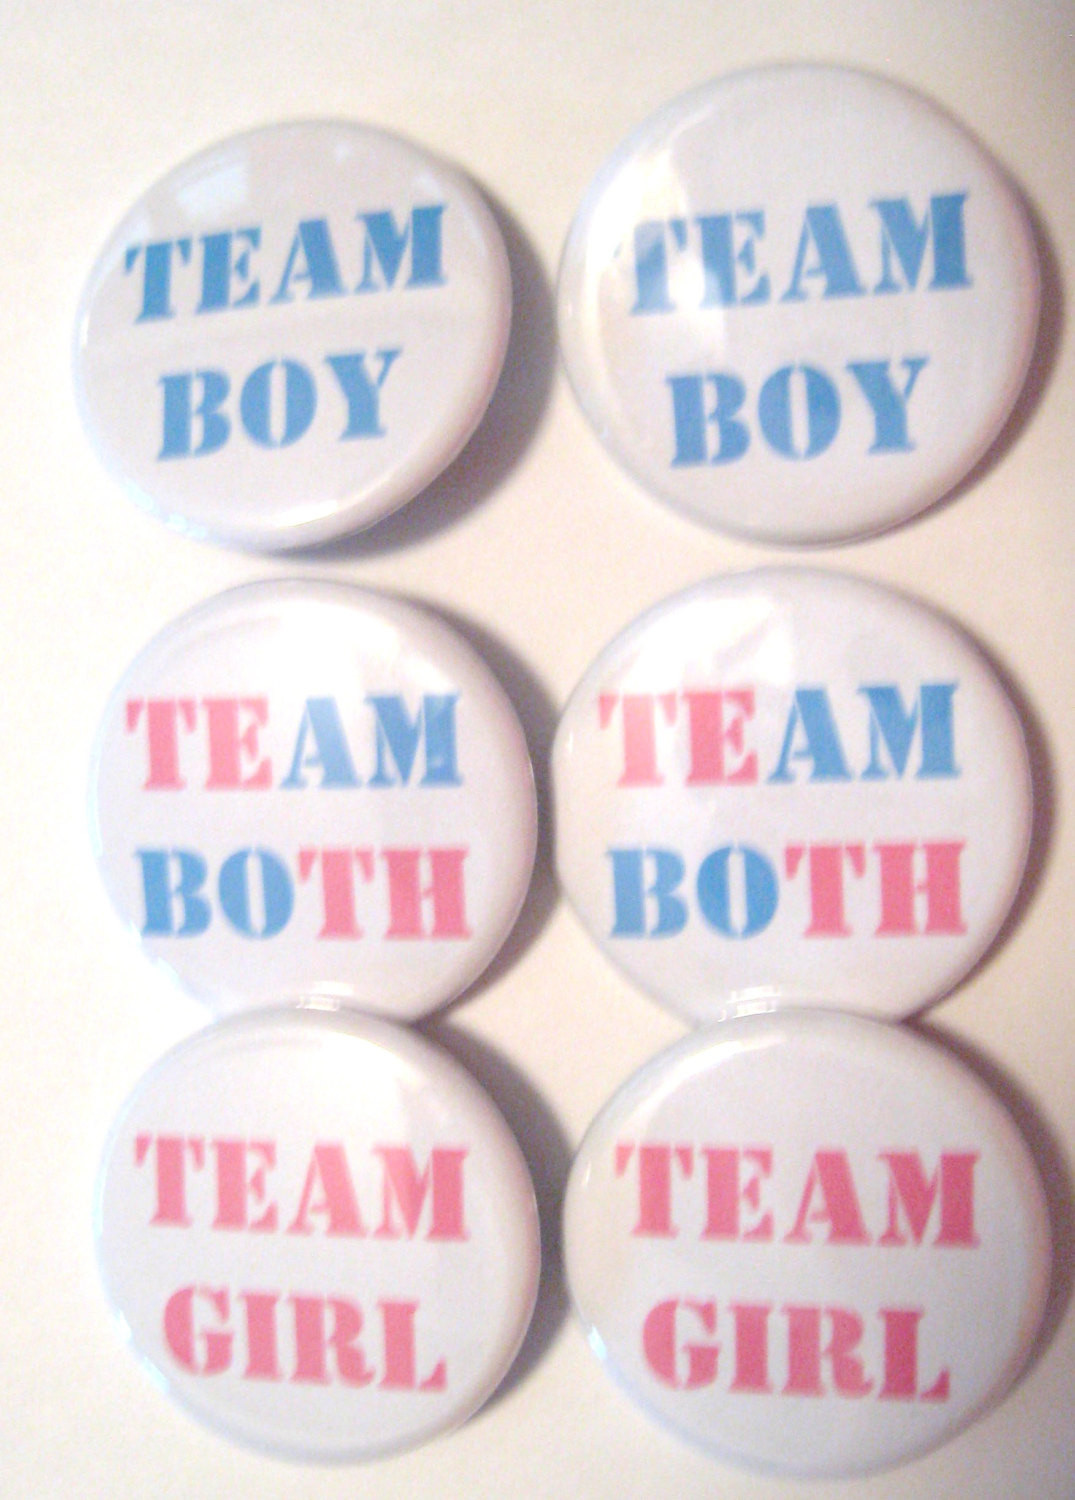 Twin Gender Reveal Party Ideas
 Twins Gender Reveal Party Team Boy Team Girl by